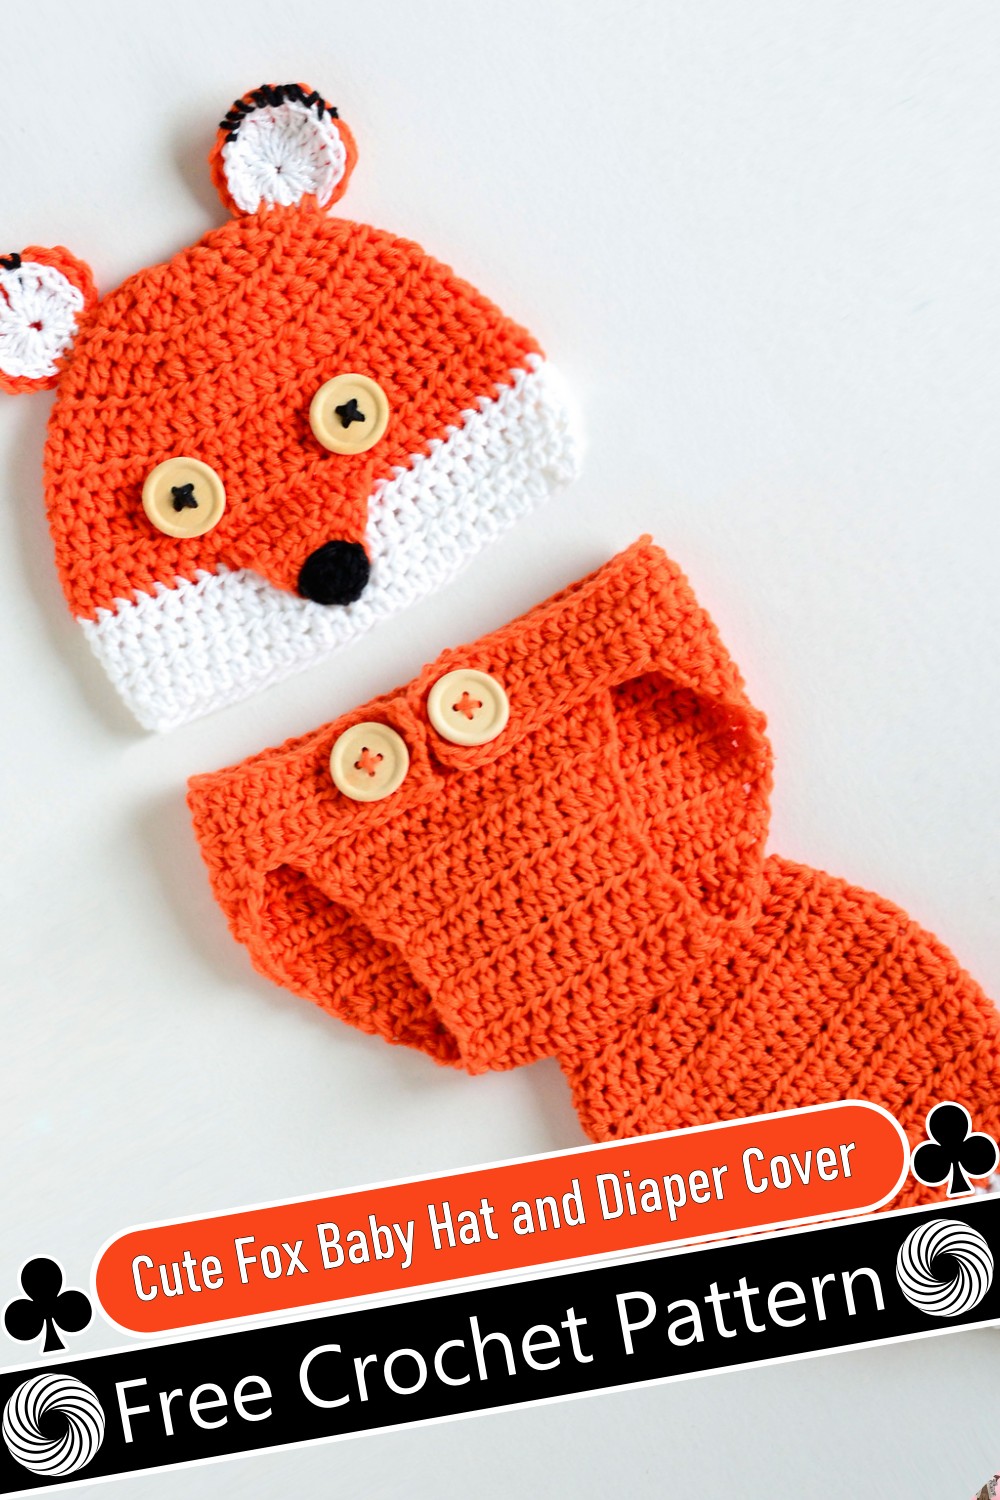 Cute Fox Baby Hat and Cover